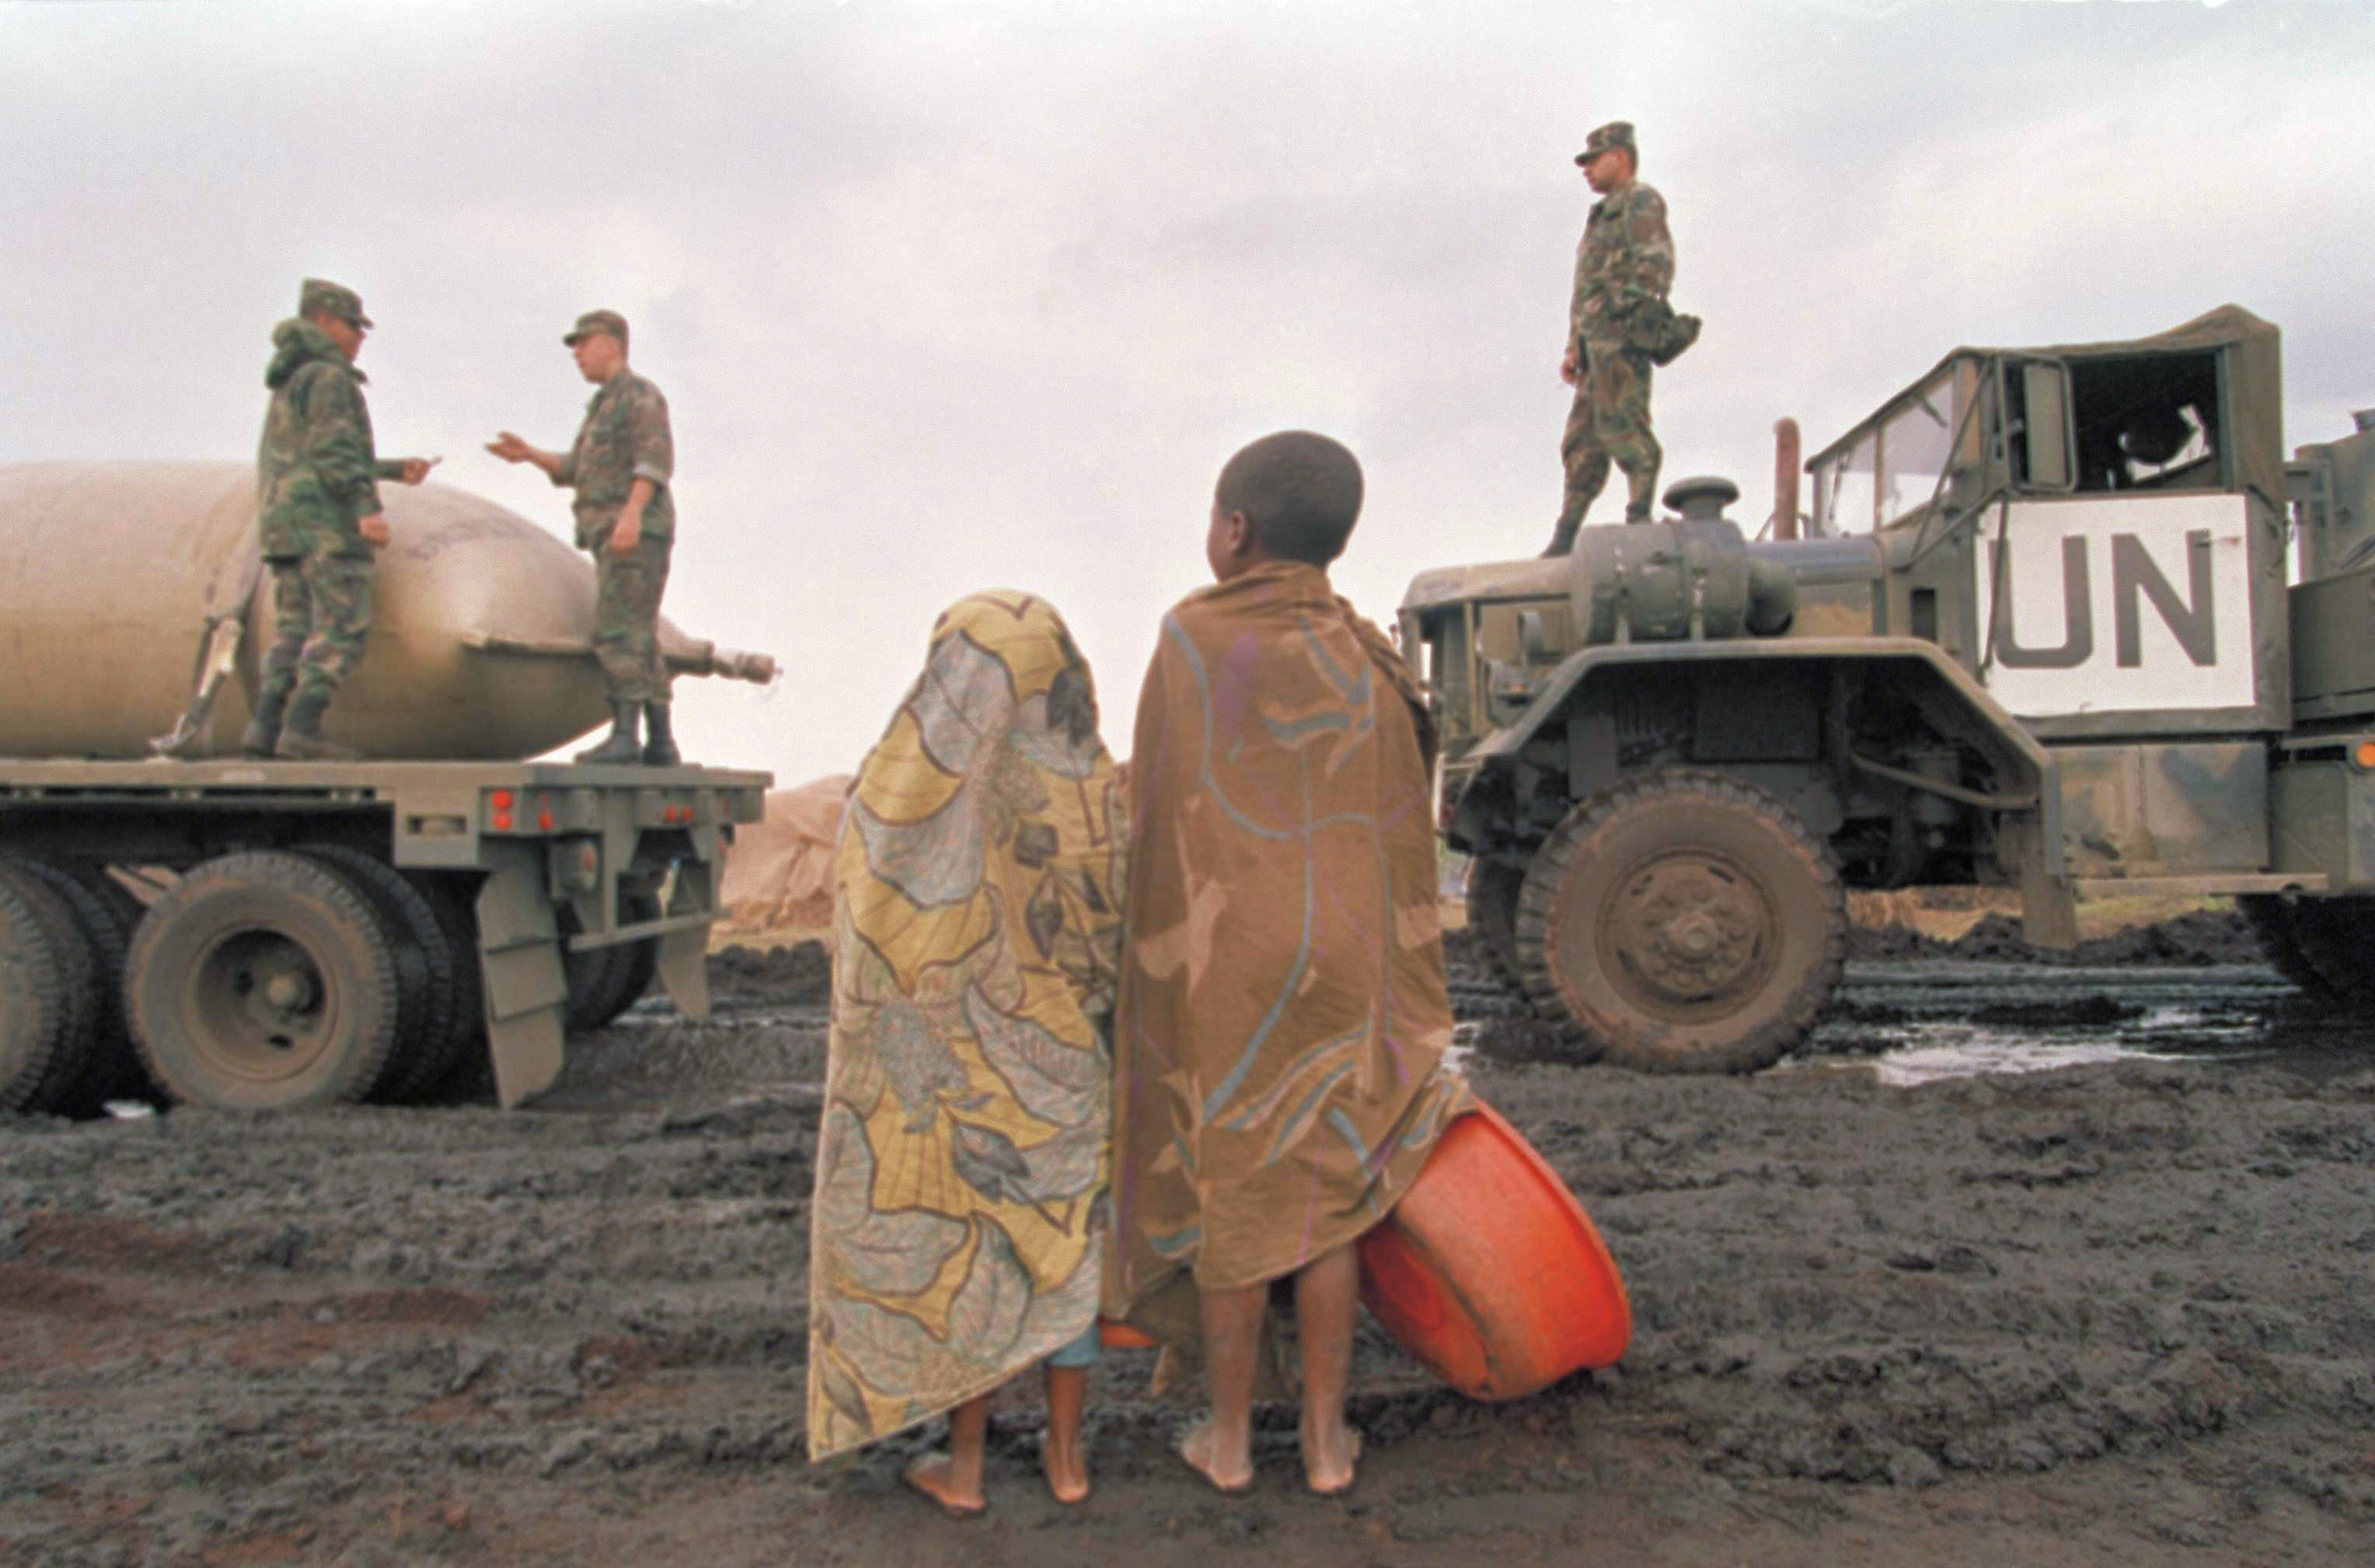 Young Rwandans watch as U.S. Army Rangers unload fresh water from trucks in the Kibumba refugee camp near Goma in August 1994